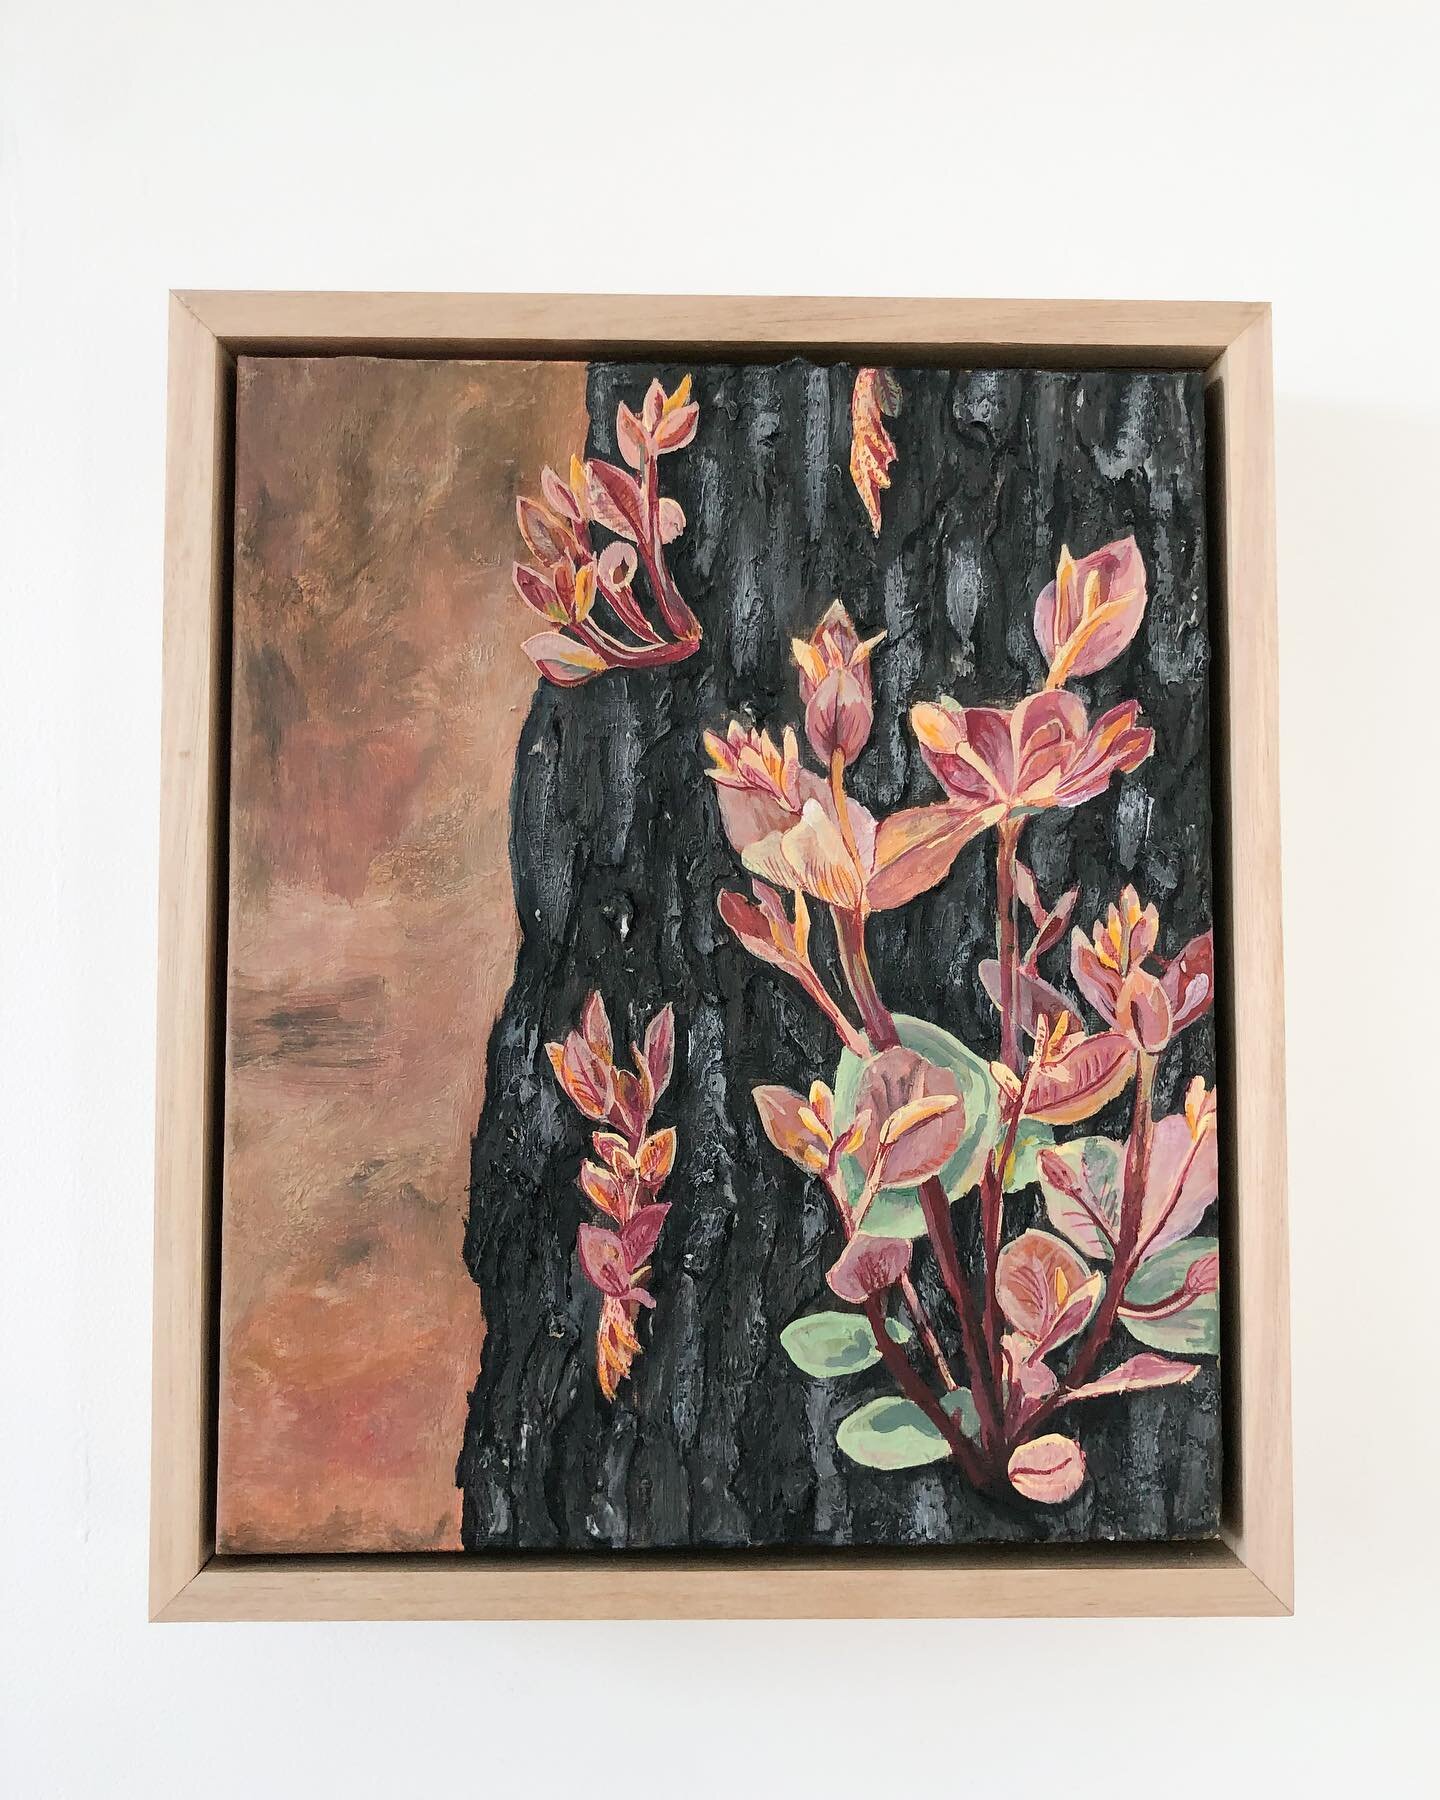 &lsquo;Re-emergence&rsquo;
.
Acrylic paints on canvas framed in Tasmanian oak
34cm H x 29cm
.
New growth emerging from a charred tree.
.
Today is the last chance to see this piece at &lsquo;The After&rsquo; exhibition at @asw.artspace.
Open 11am - 4p